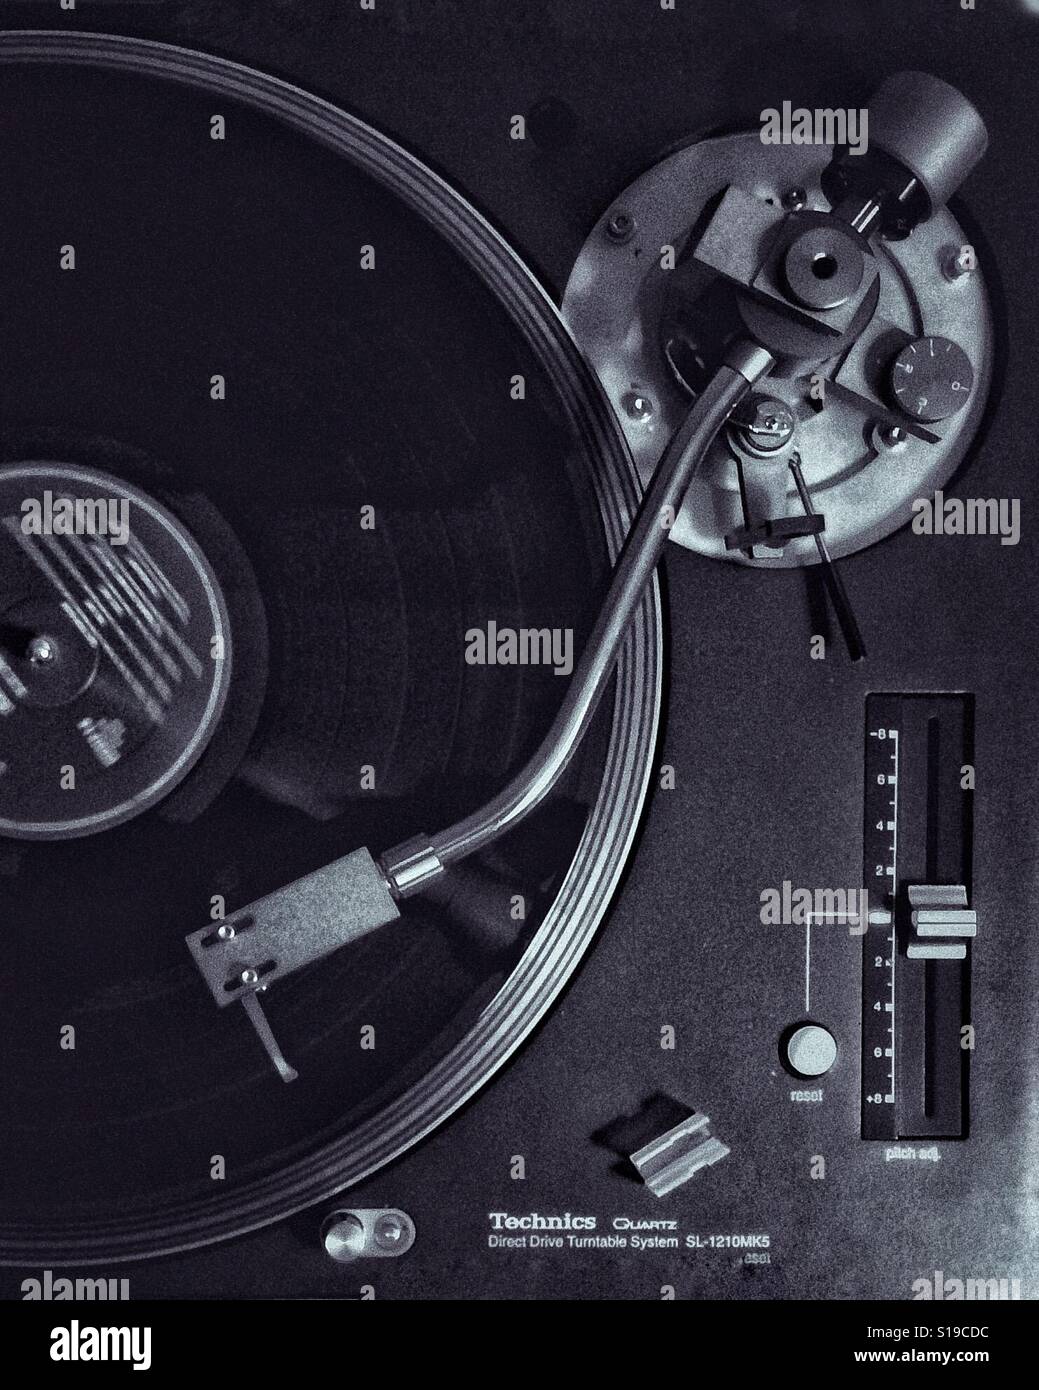 Technics turntable close-up in black and white Stock Photo